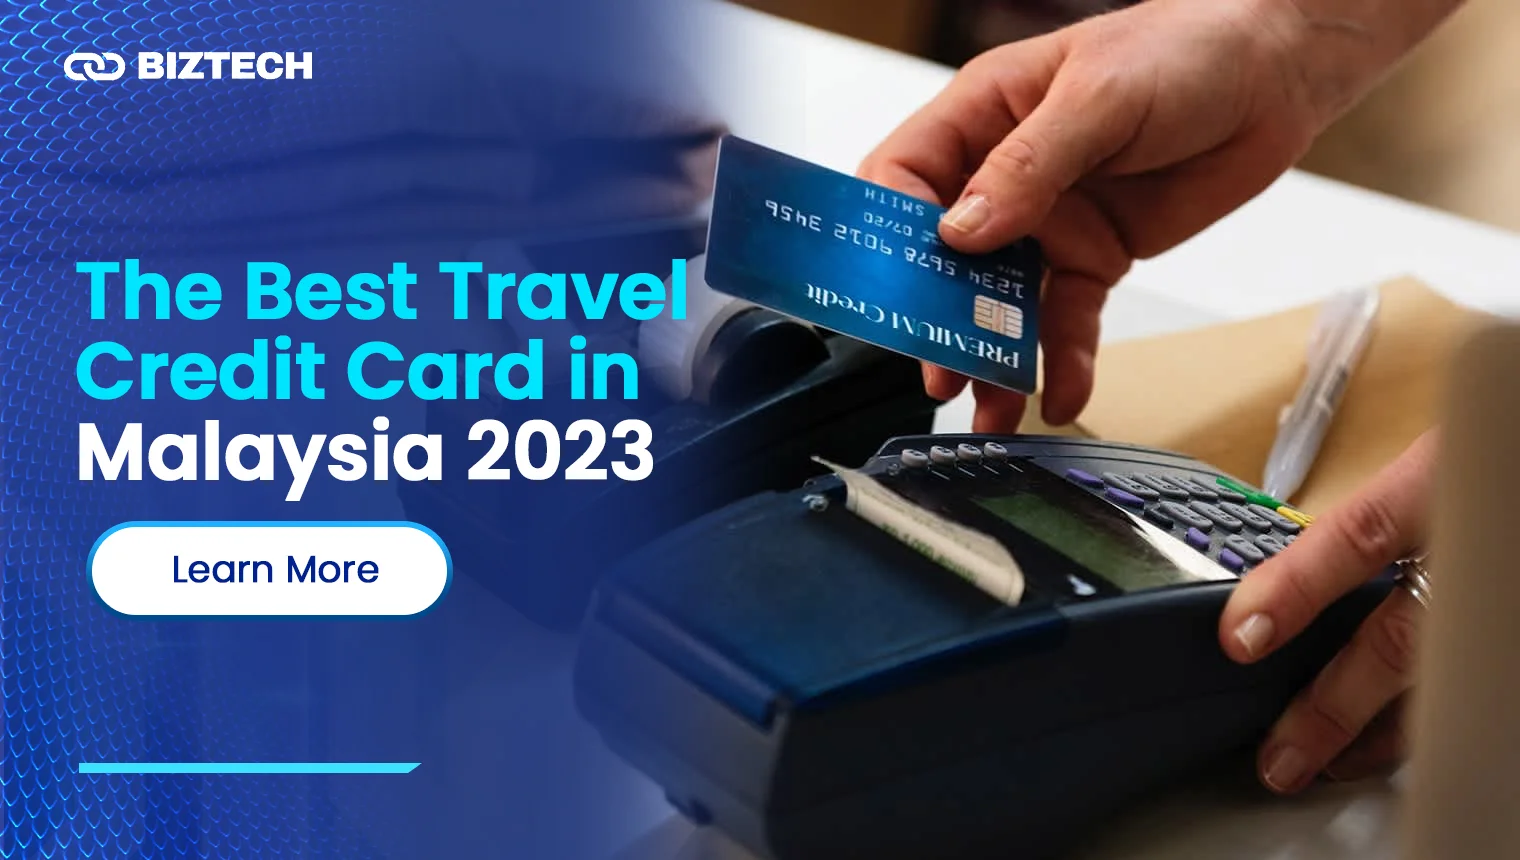 The Best Travel Credit Card In Malaysia 2023